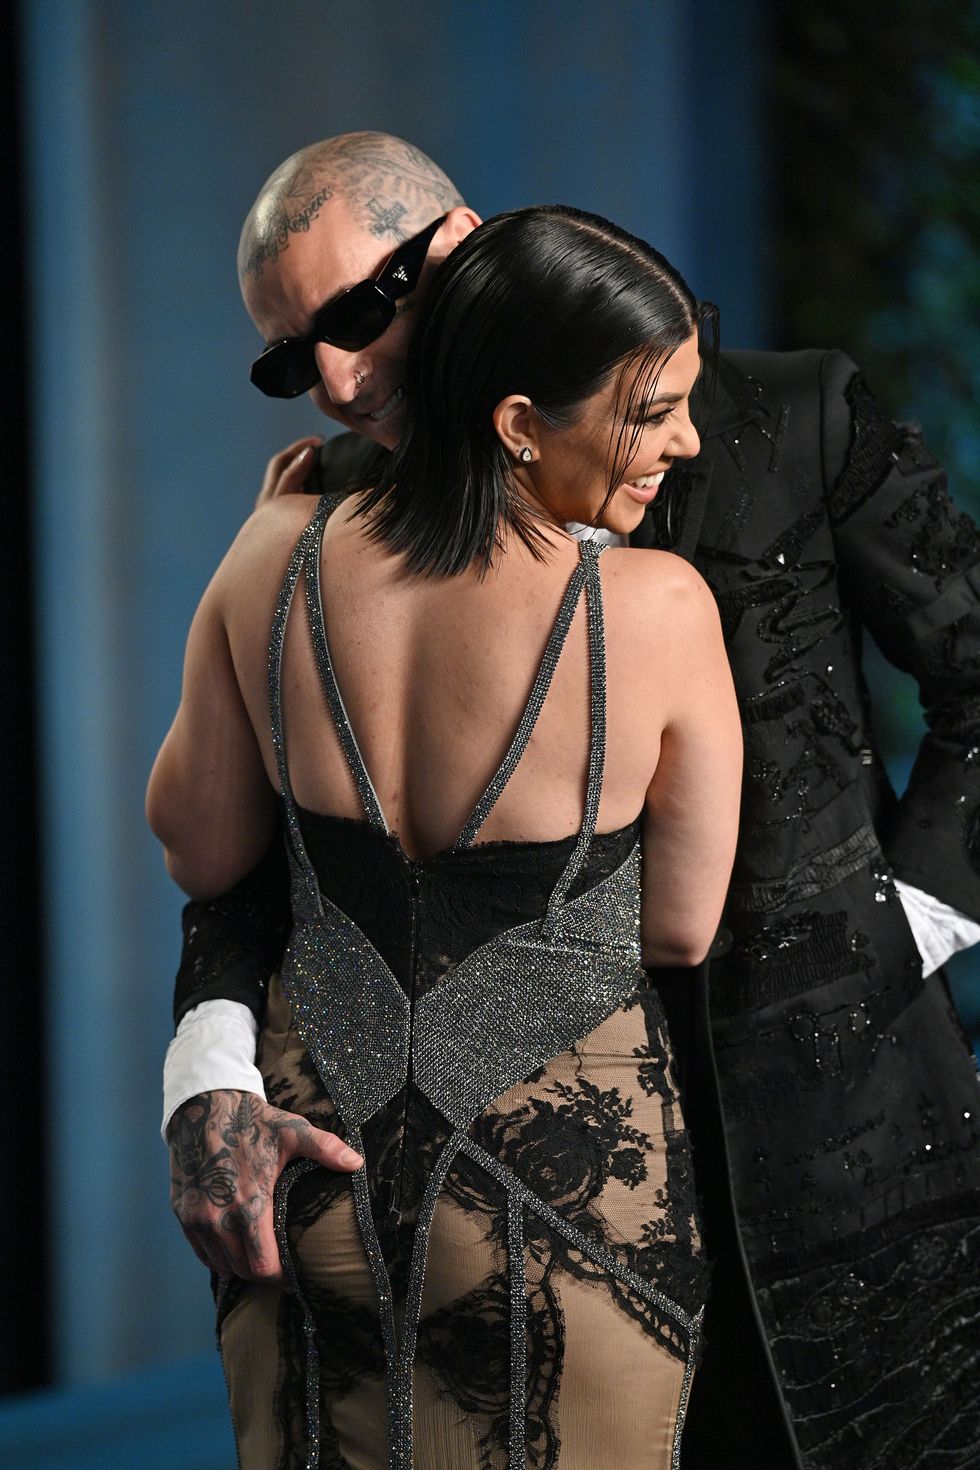 kourtney kardashian and travis barker at the vanity fair oscars after party